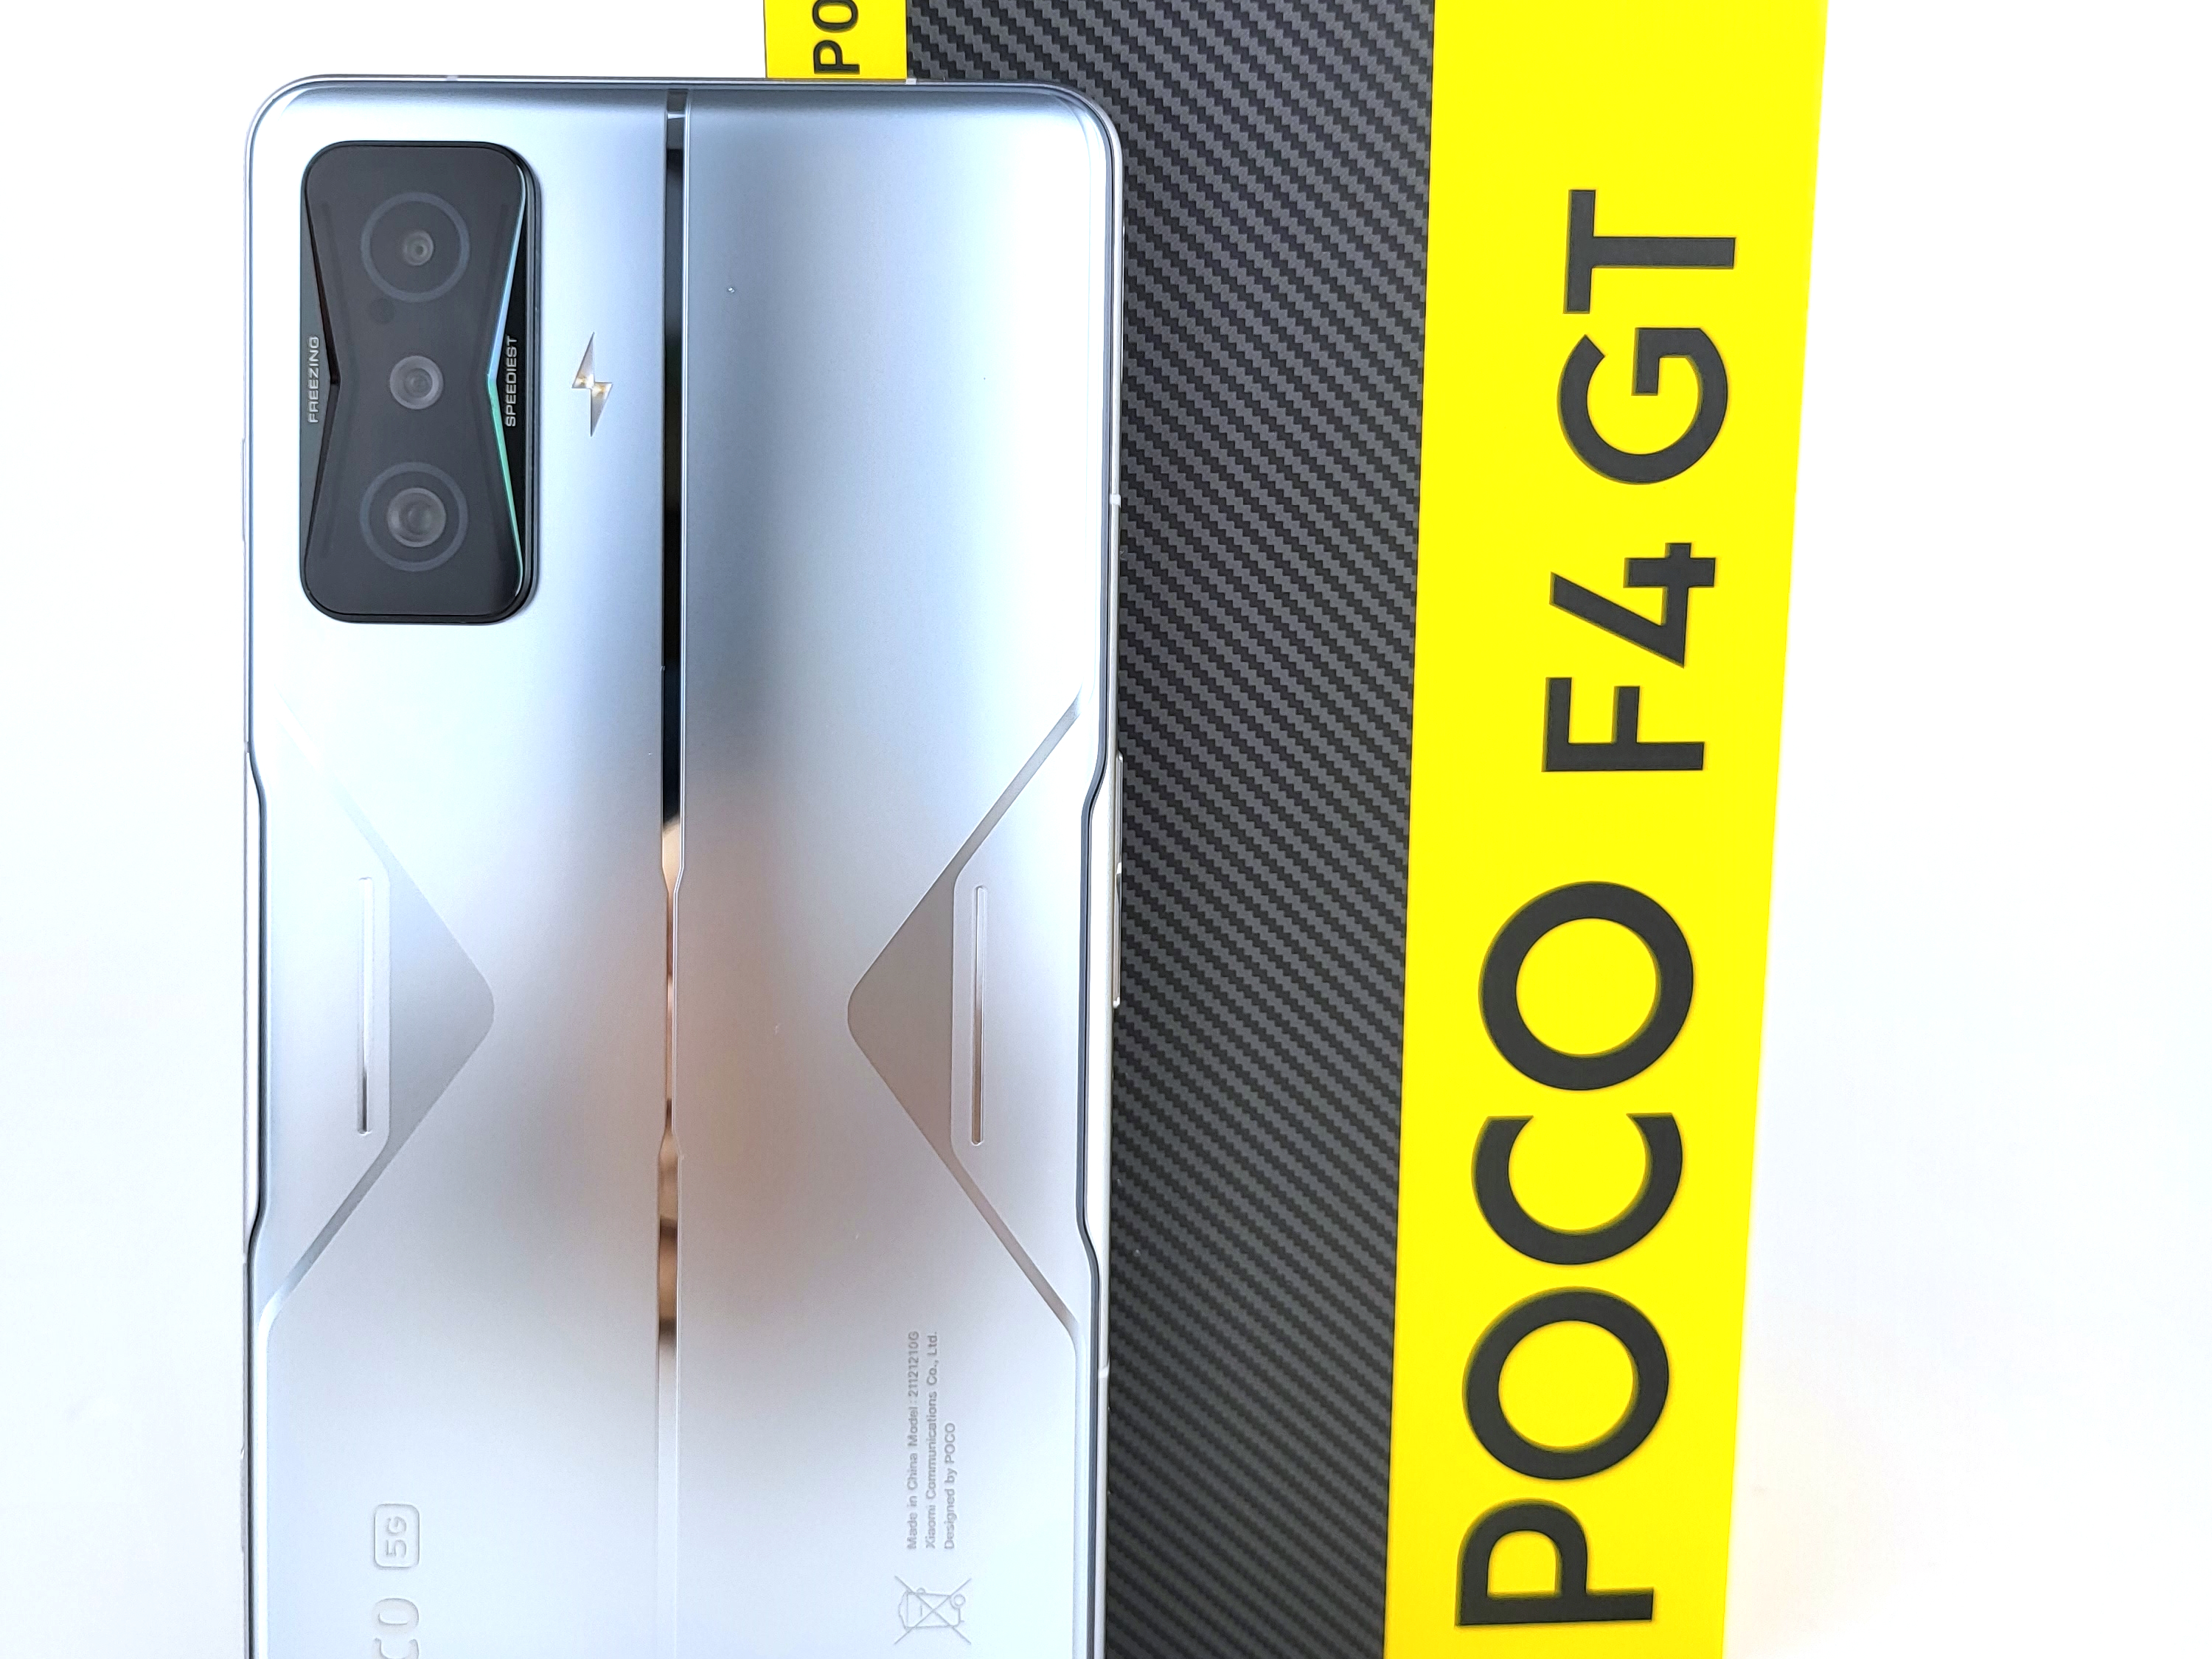 Luipaard Trots Viool Xiaomi Poco F4 GT review - Affordable gaming smartphone with flagship  features - NotebookCheck.net Reviews